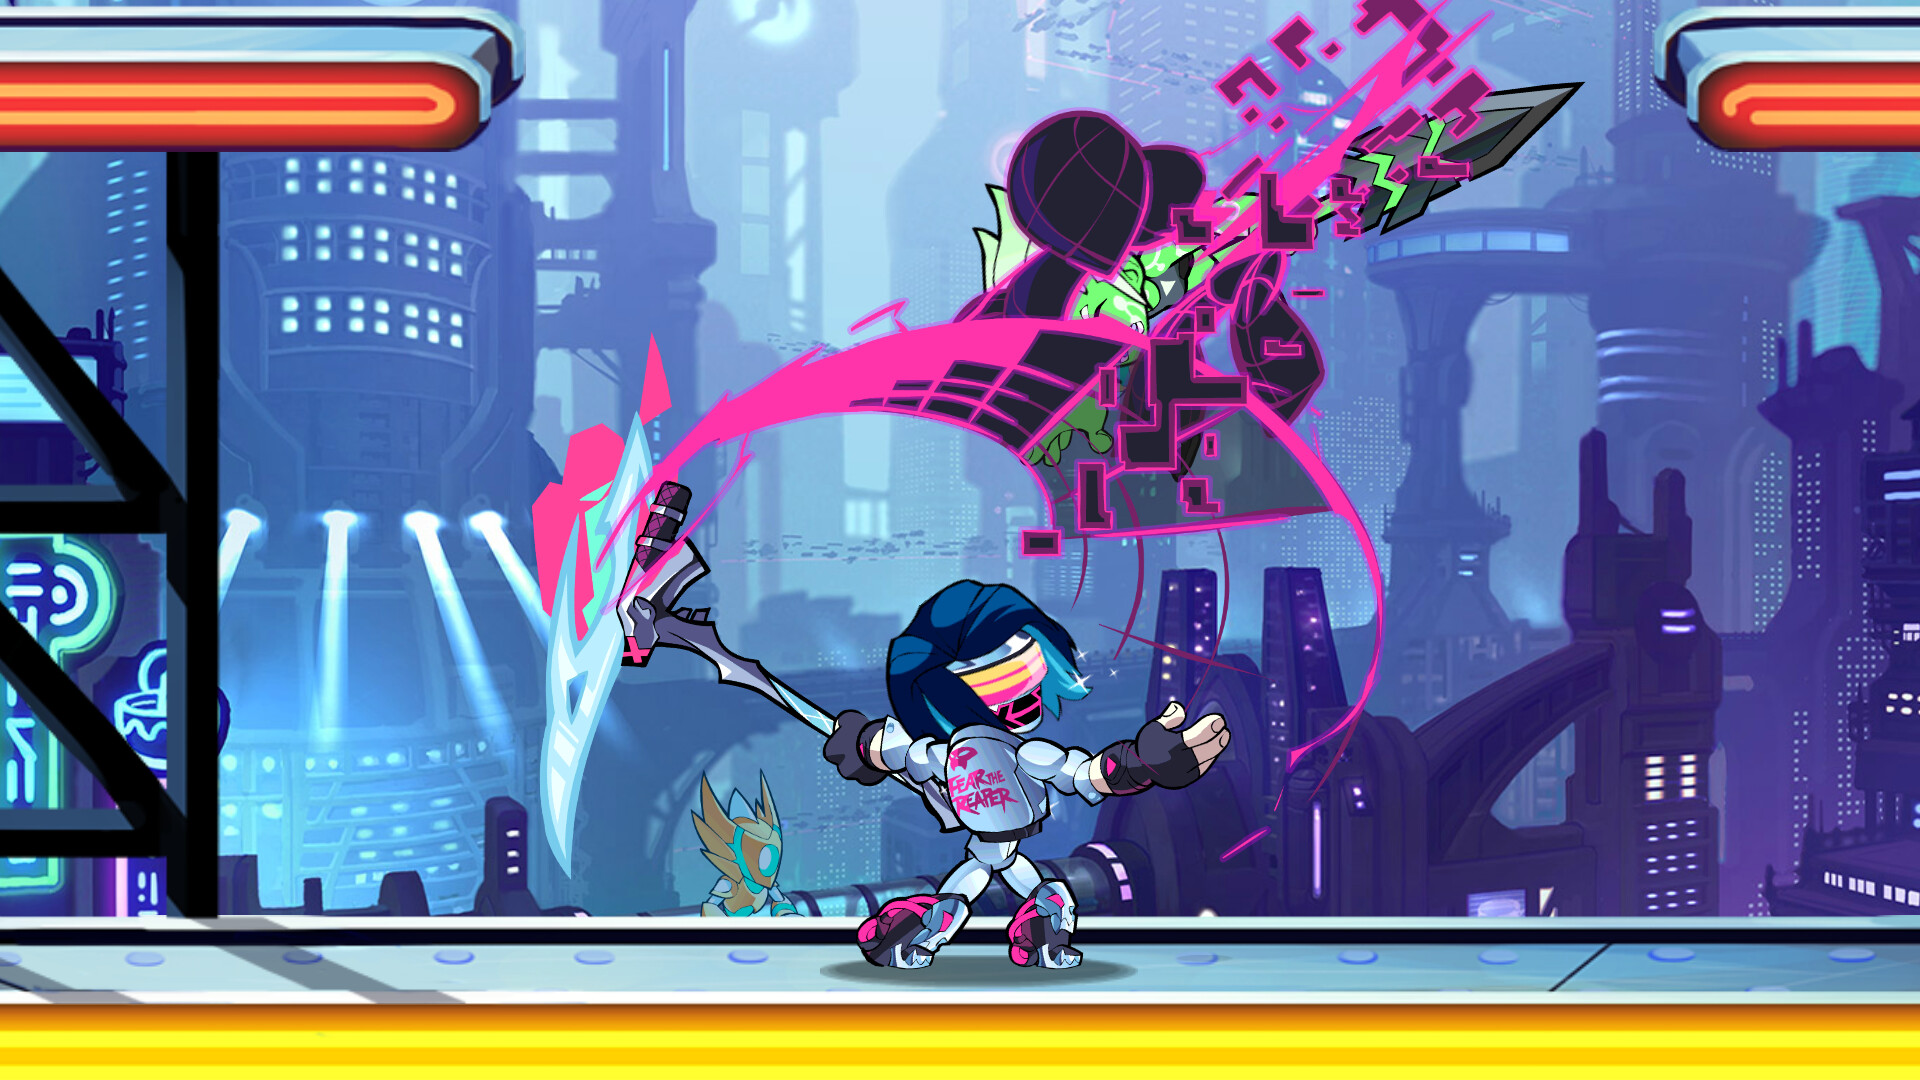 Brawlhalla: Battle Pass Classic 2: Synthwave Reloaded Featured Screenshot #1